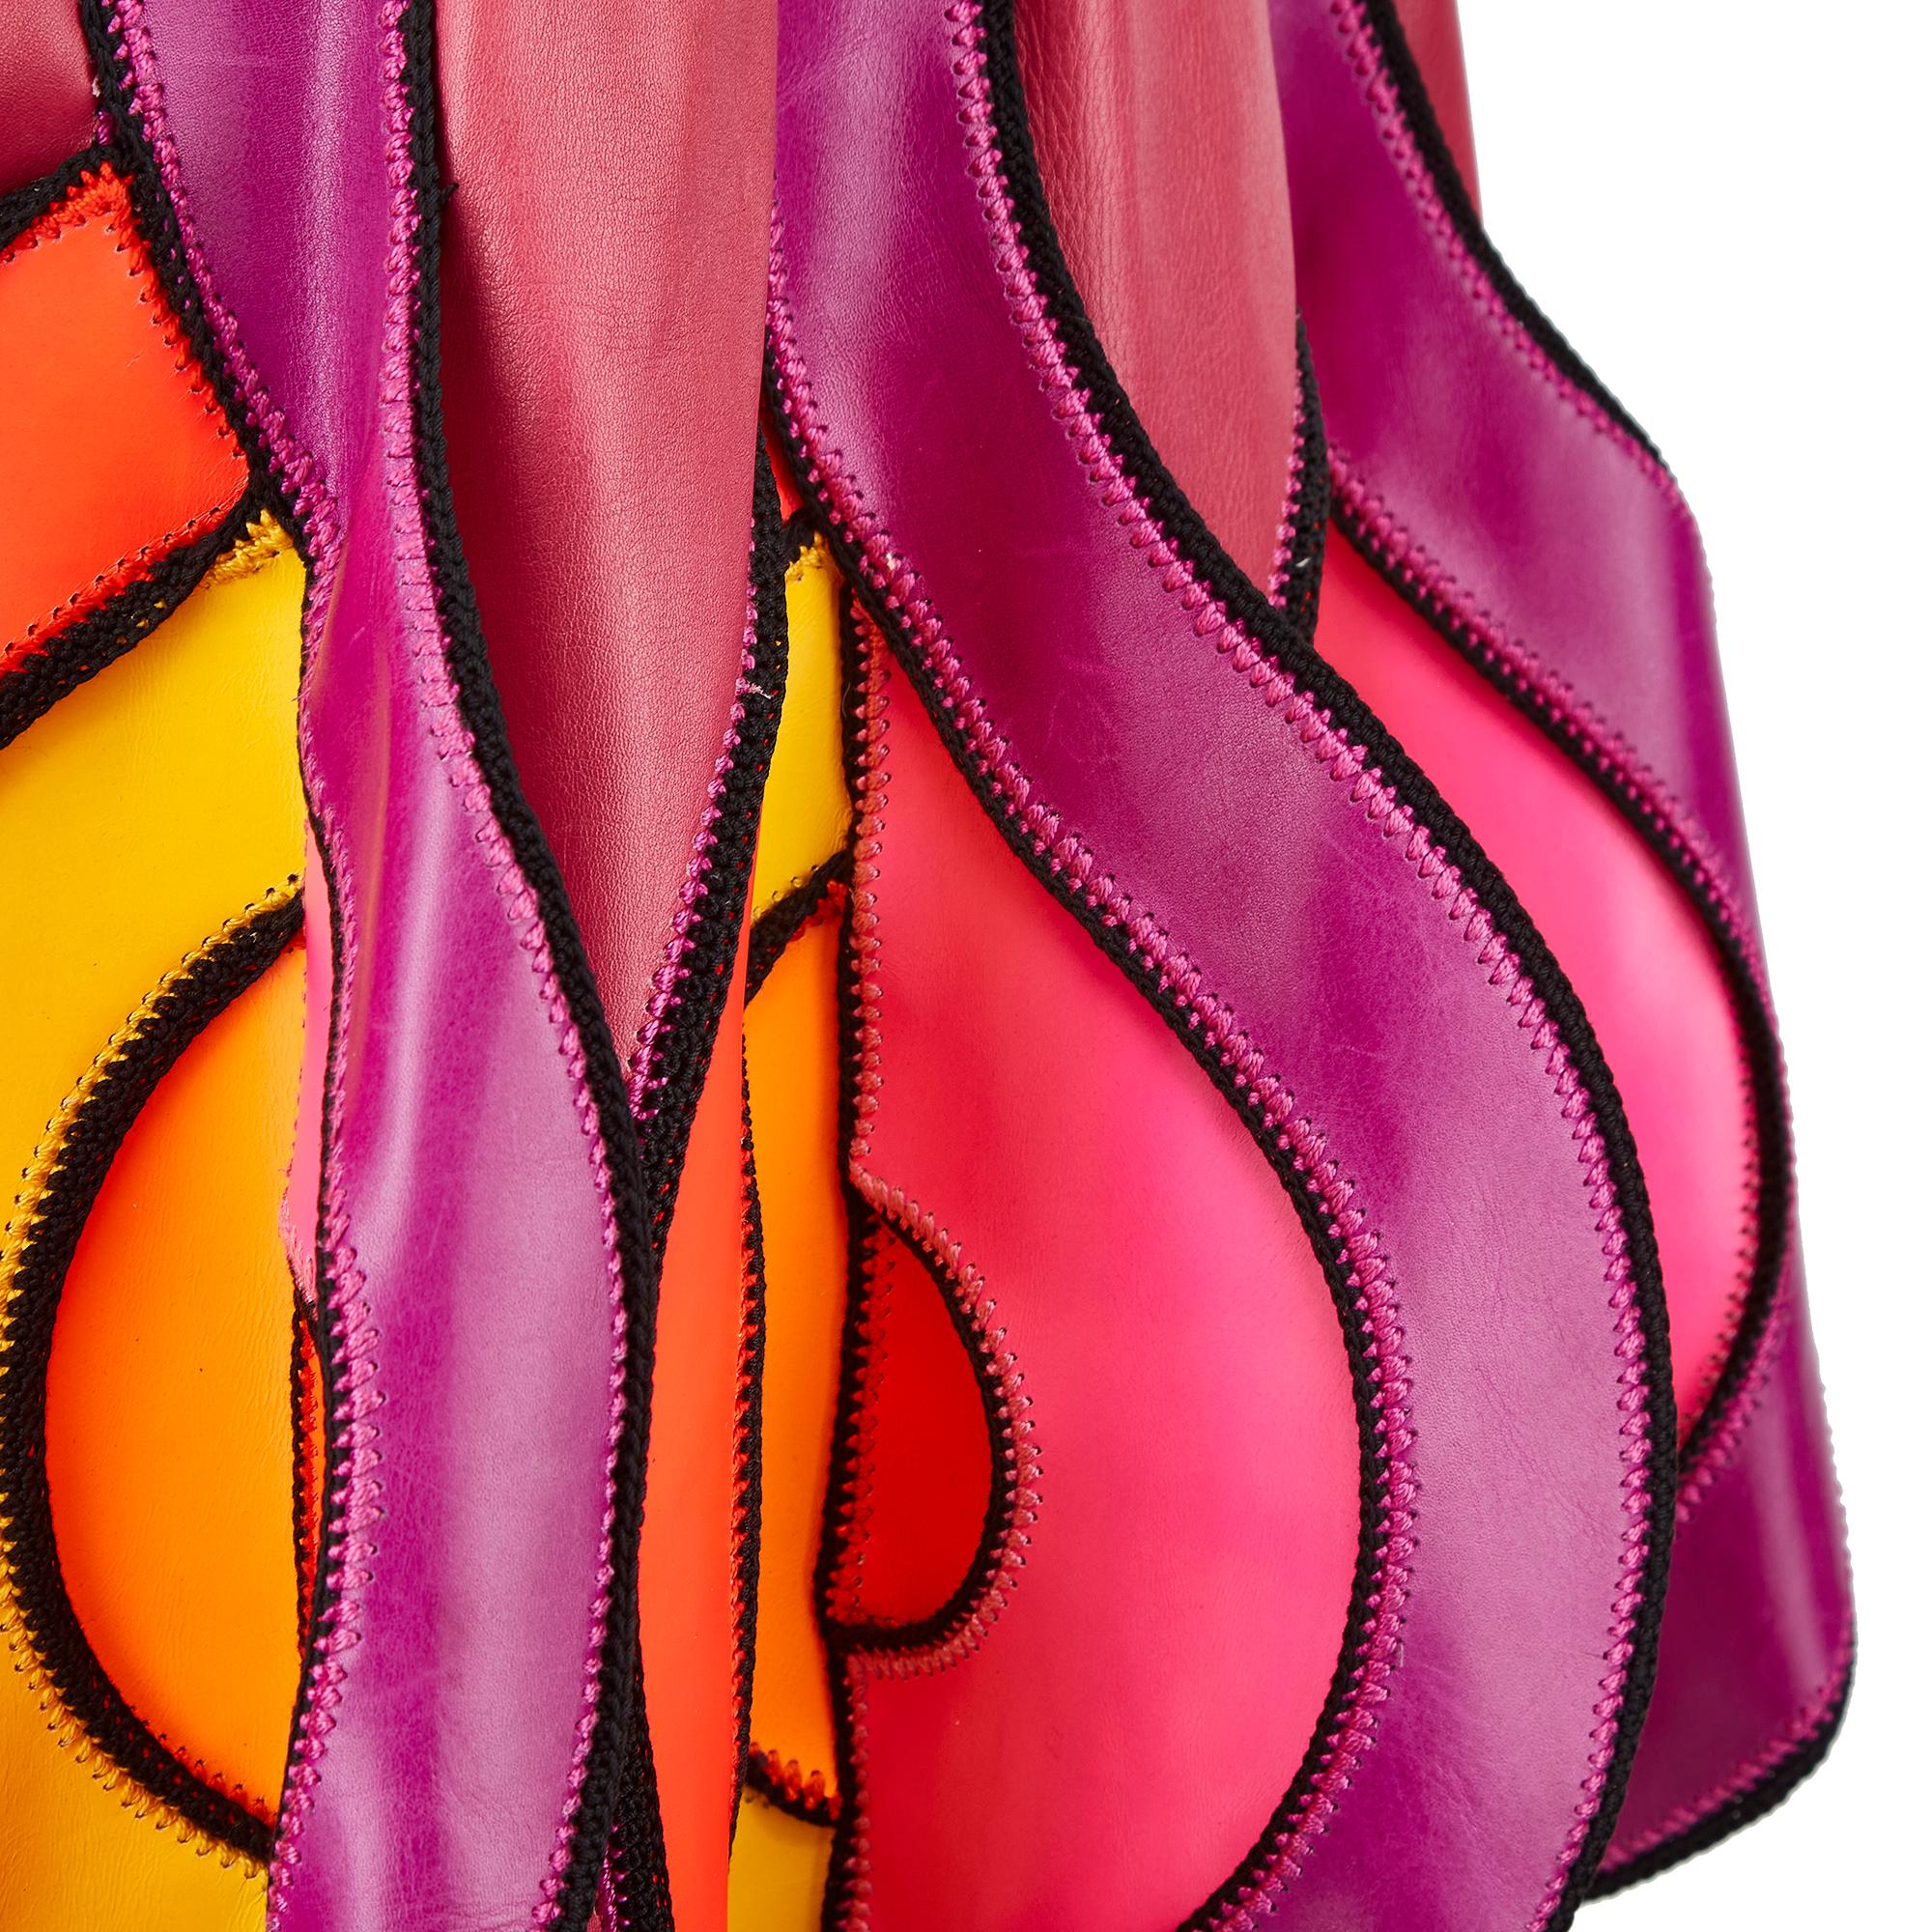 Women's 1970s French Couture Psychedelic Leather Skirt